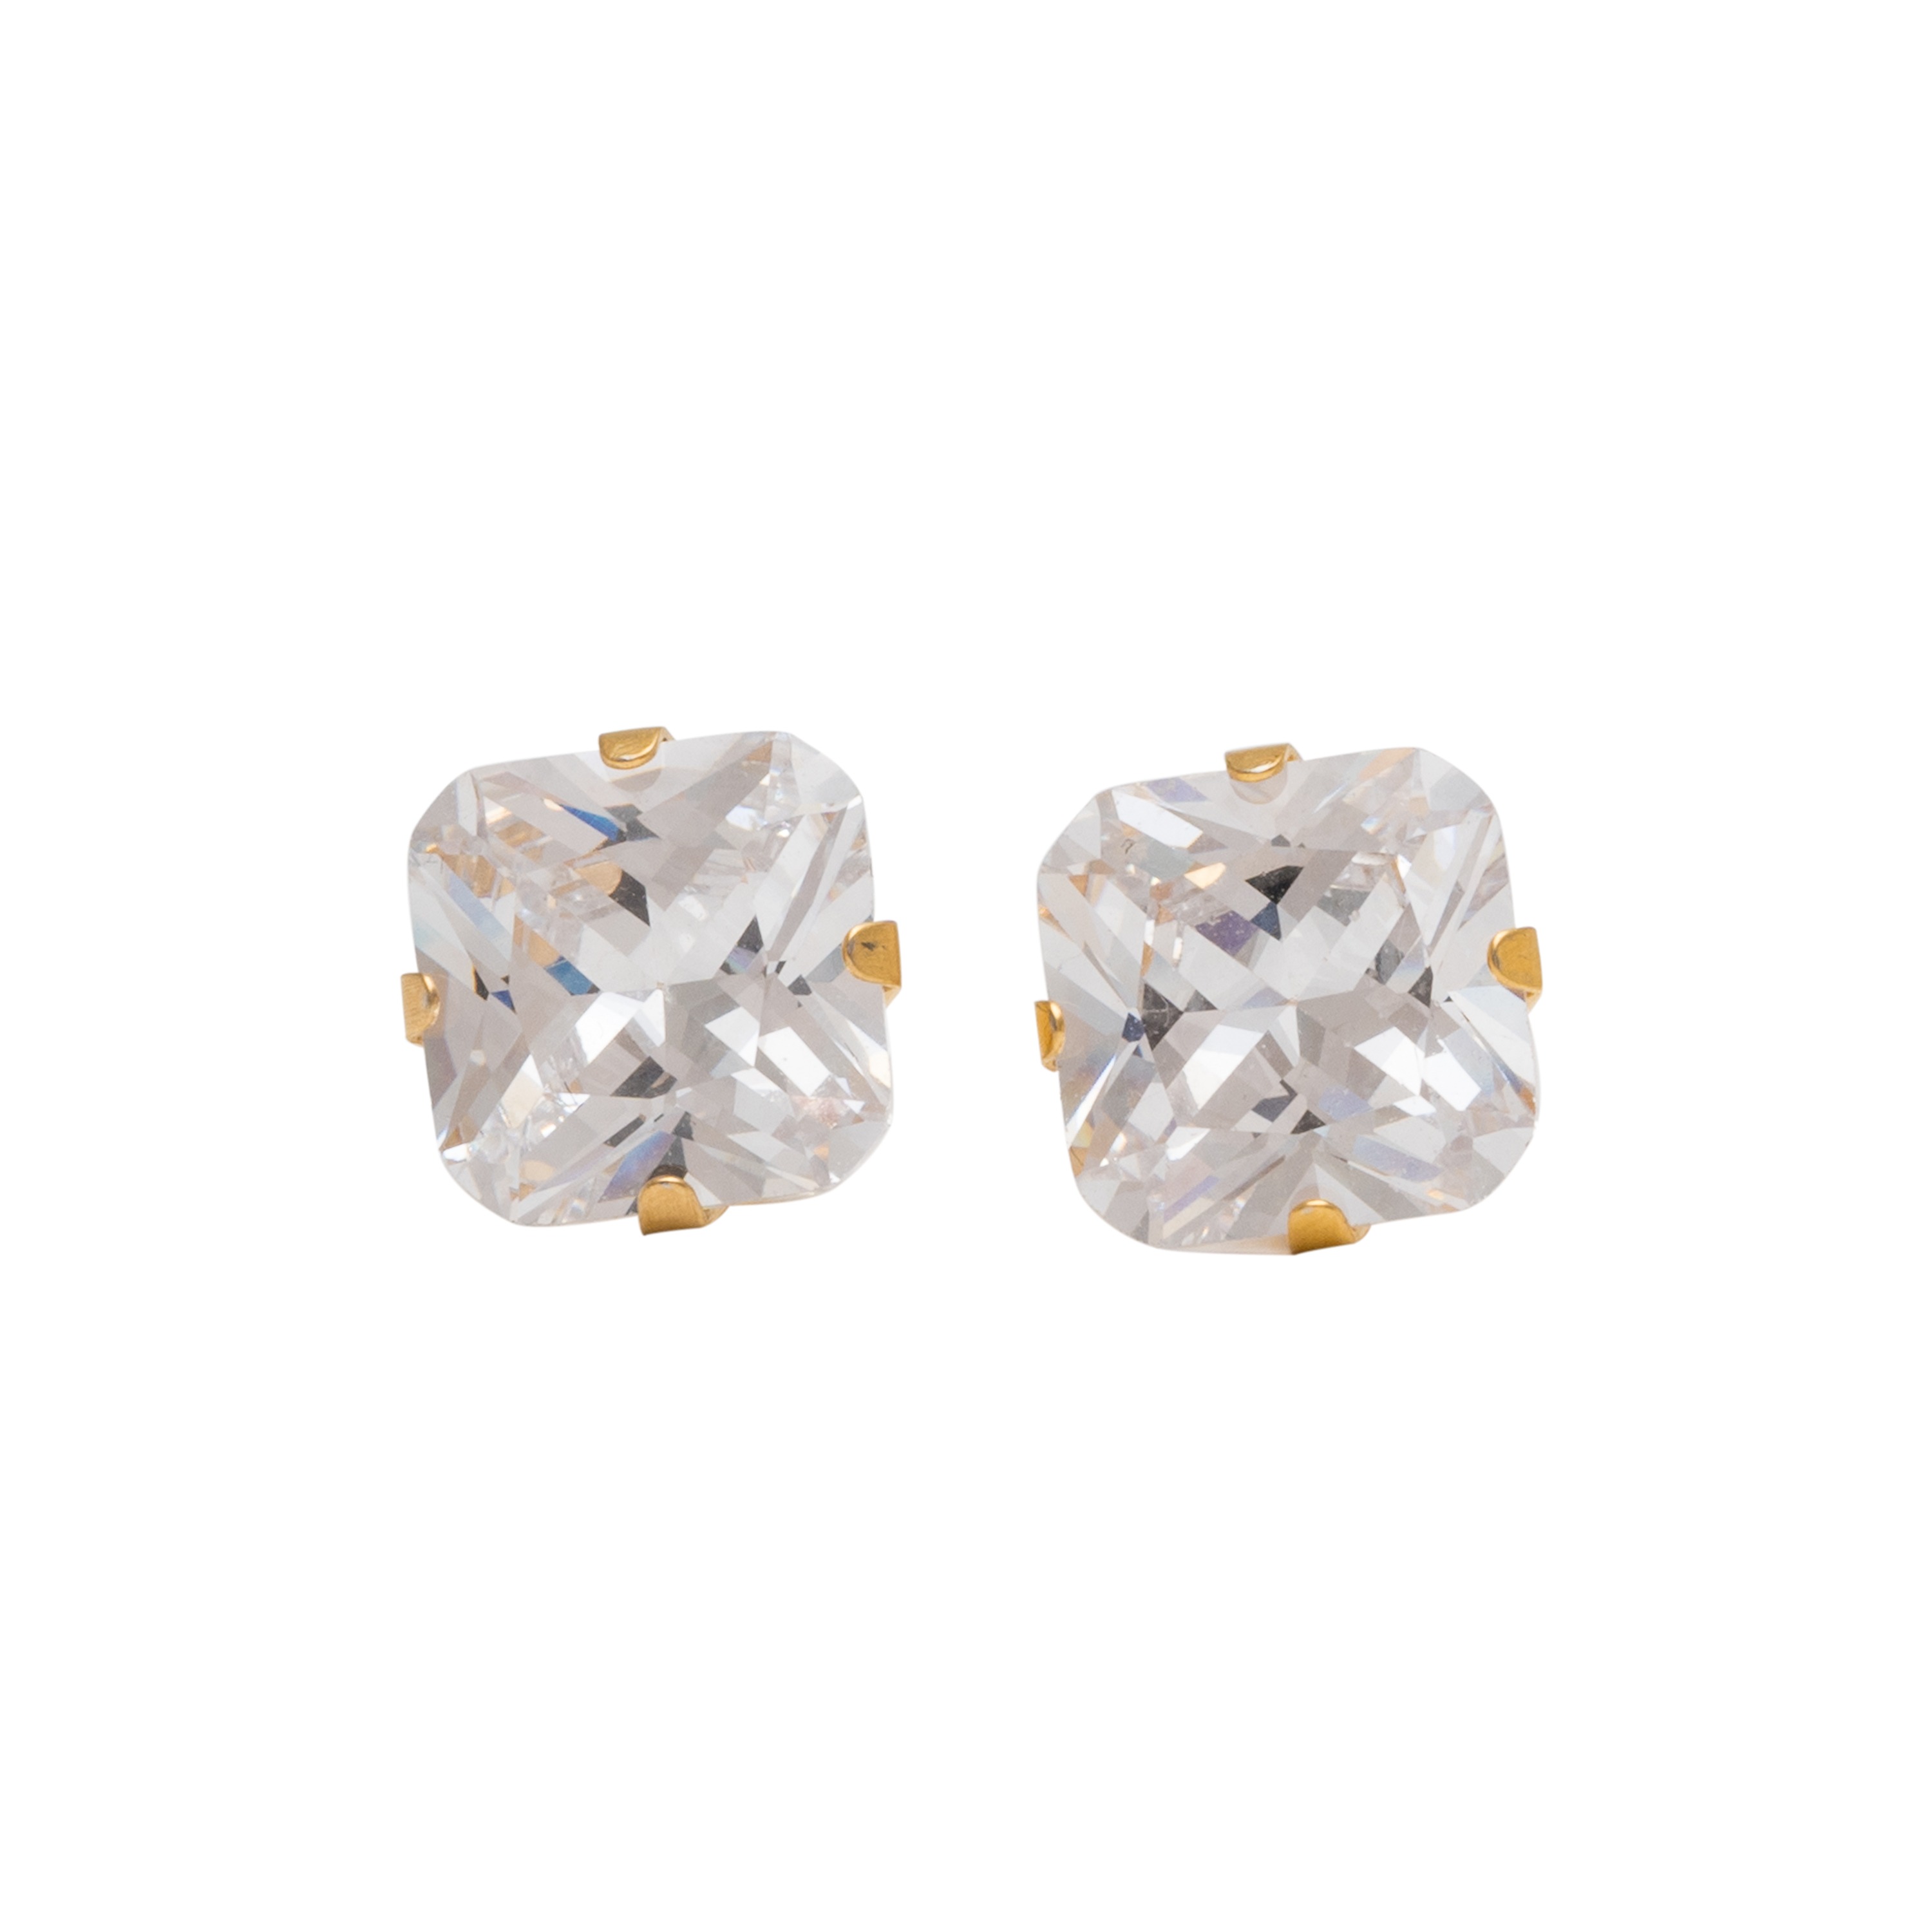 8*8MM - Princess Cut Cubic Zirconia (Square) | 24K Gold Plated Simple Yet Stylish, Cute & Trending Fashion Earrings / Ear Studs for Girls & Women Online @ Pakistan | Studex Sensitive (for daily wear)